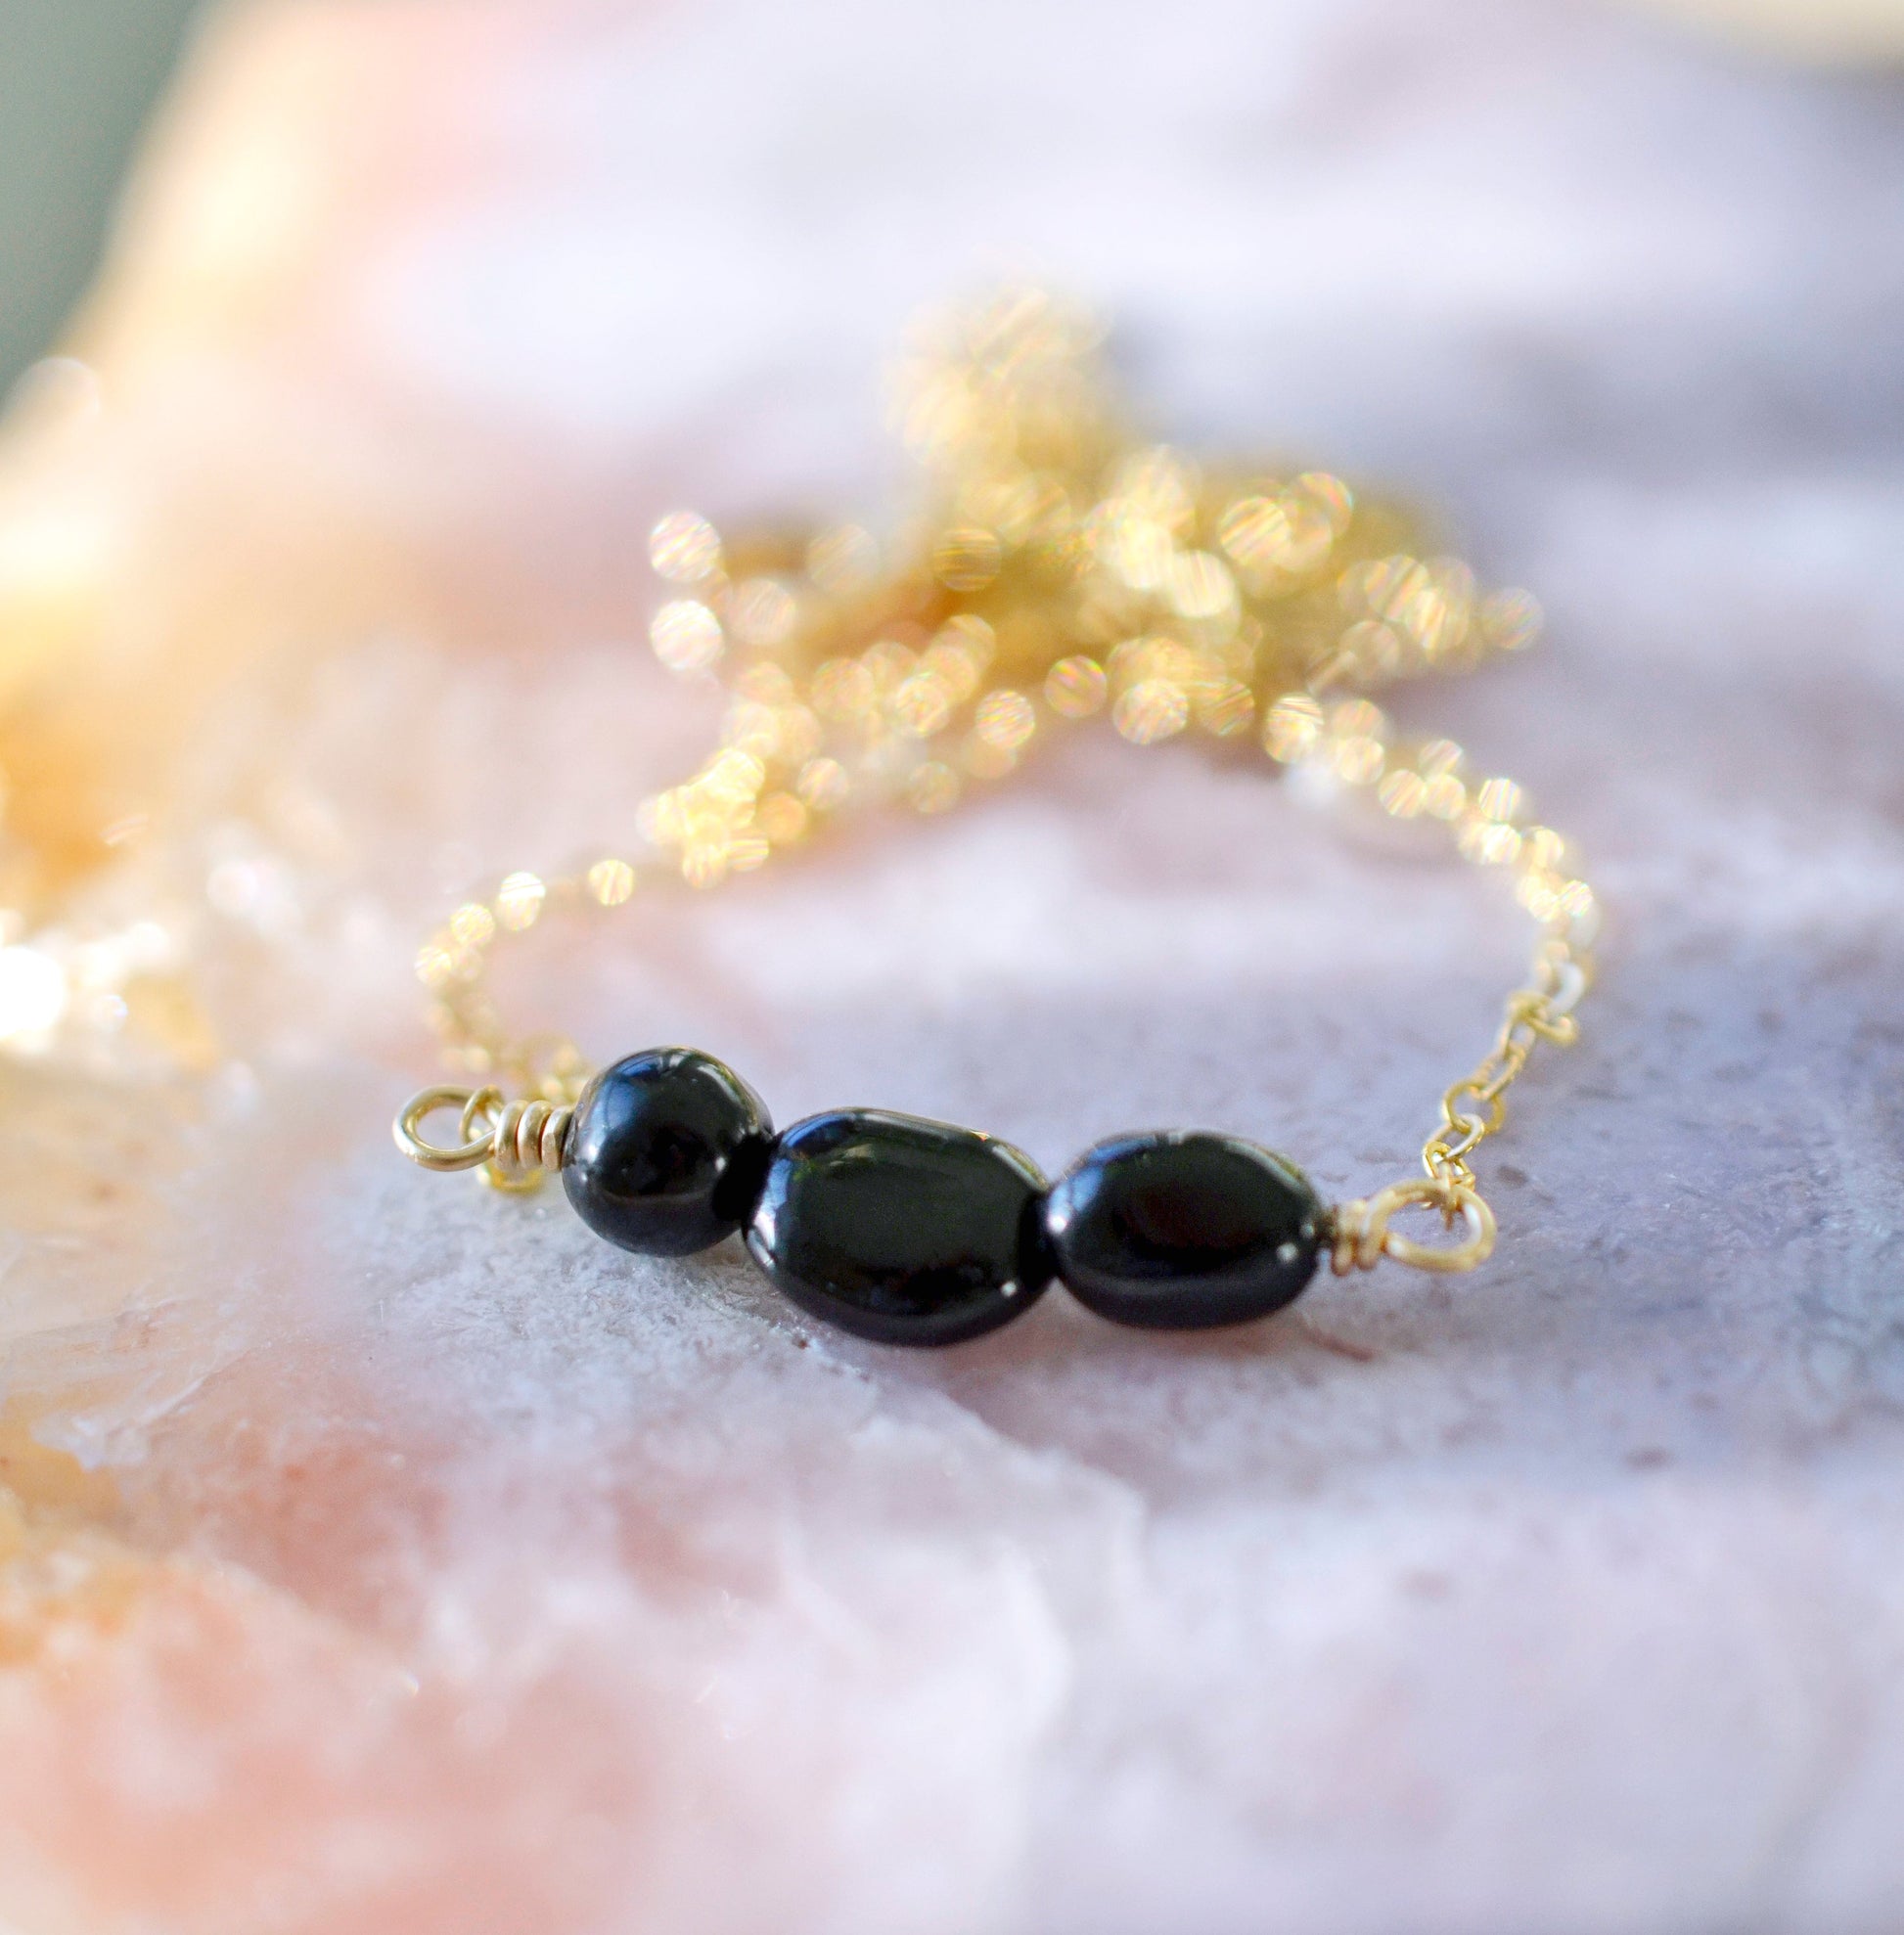 Black Tourmaline Necklace, Polished Tourmaline Necklace, Sterling Silver or 14k Gold Filled, Protection Empath Pendant, Dainty, For Women